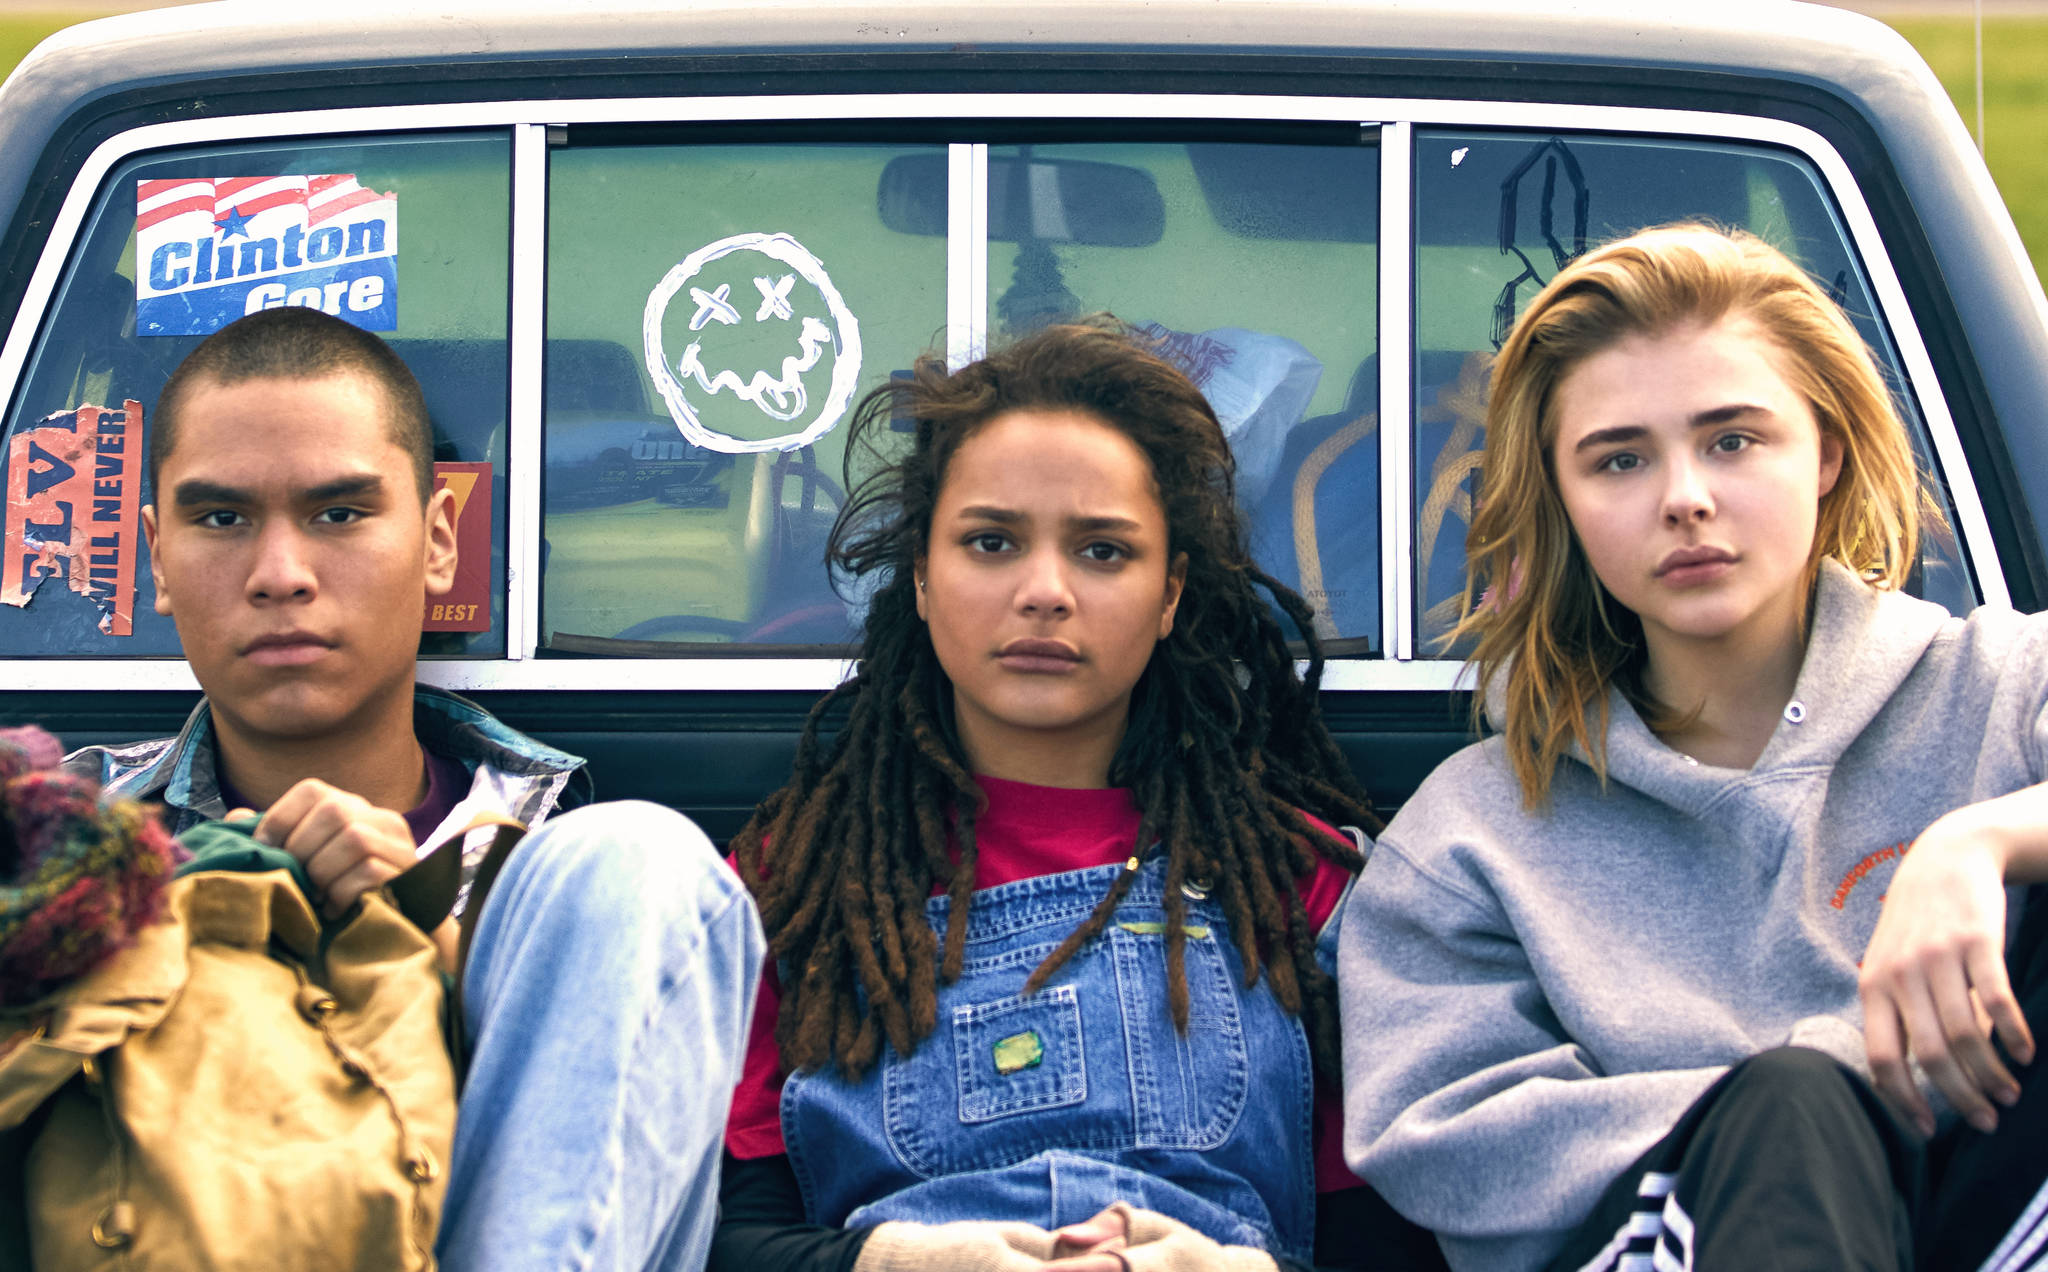 Image from the film The Miseducation of Cameron Post. Three teenagers, one boy and two girls, sit side by side in the back of a truck. They all look directly at the camera.